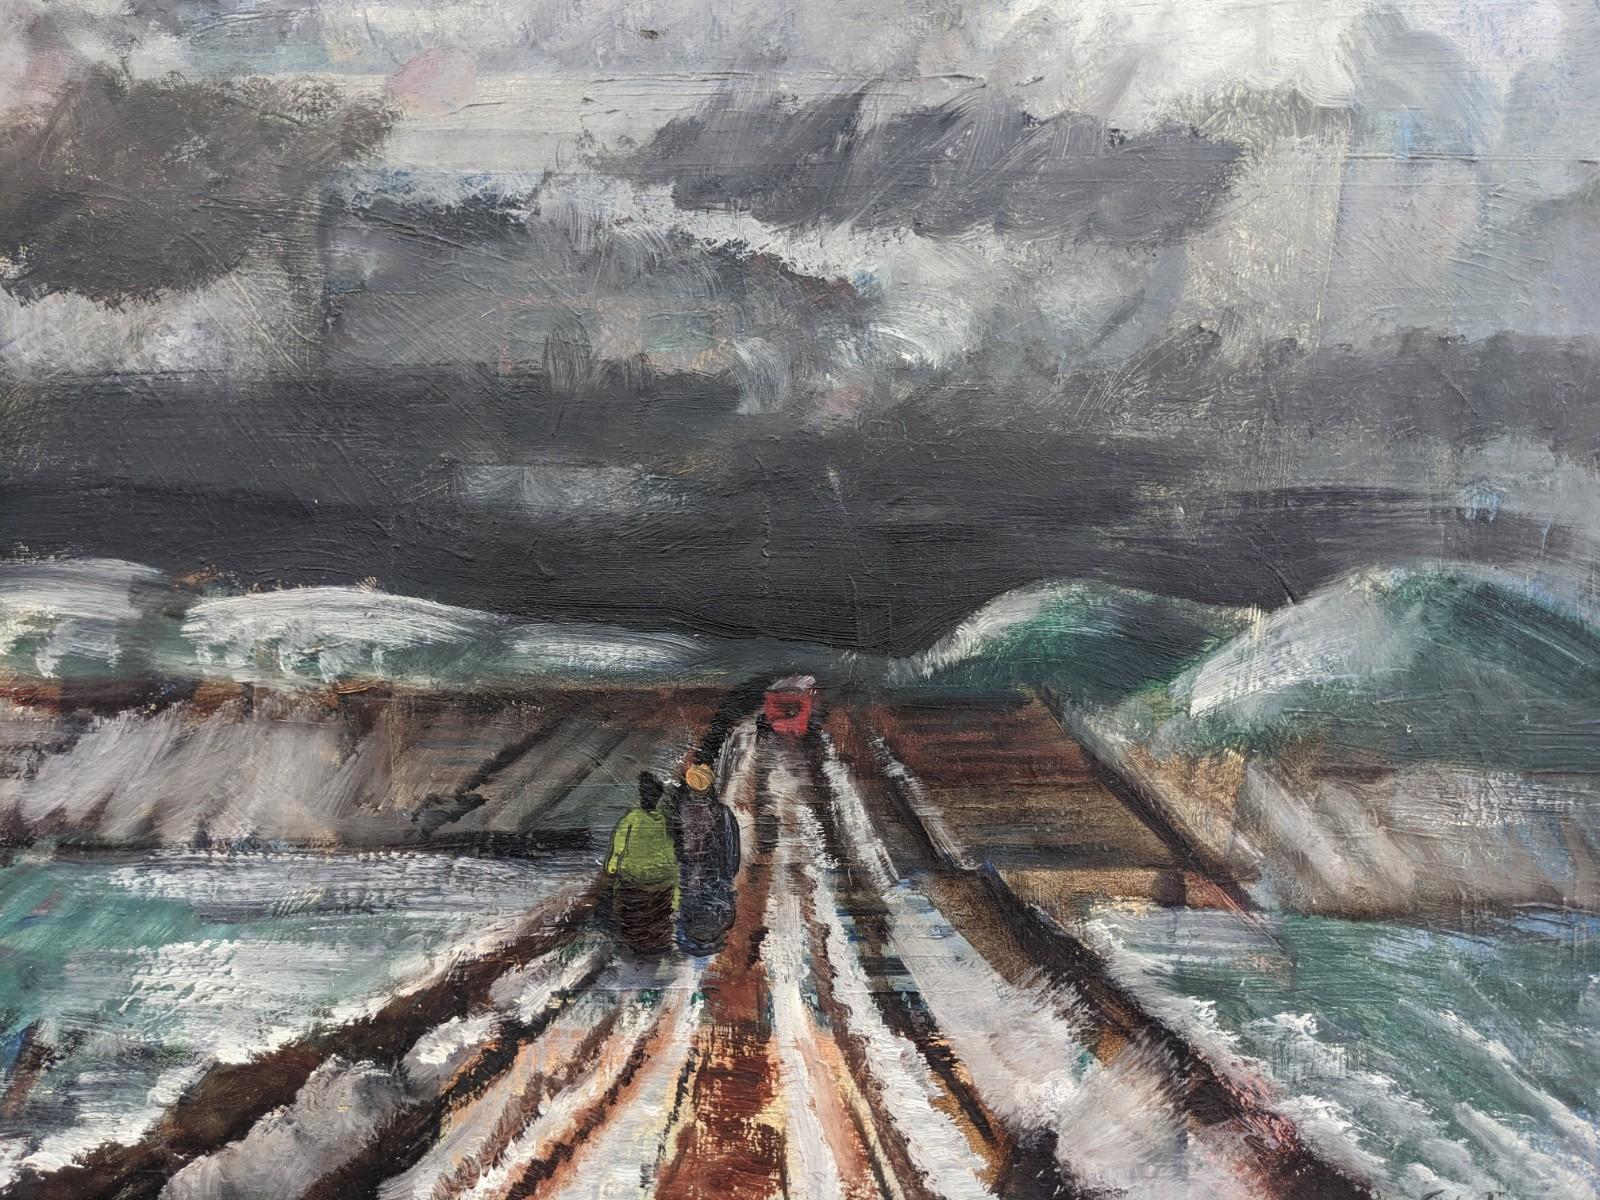 THE LONG ROAD
Size: 52 x 60cm (including frame)
Oil on Canvas

A wonderfully executed sombre oil painting depicting two figures walking down a long open road, dated 1938.

The canvas is filled with expressive brushstrokes that have been executed